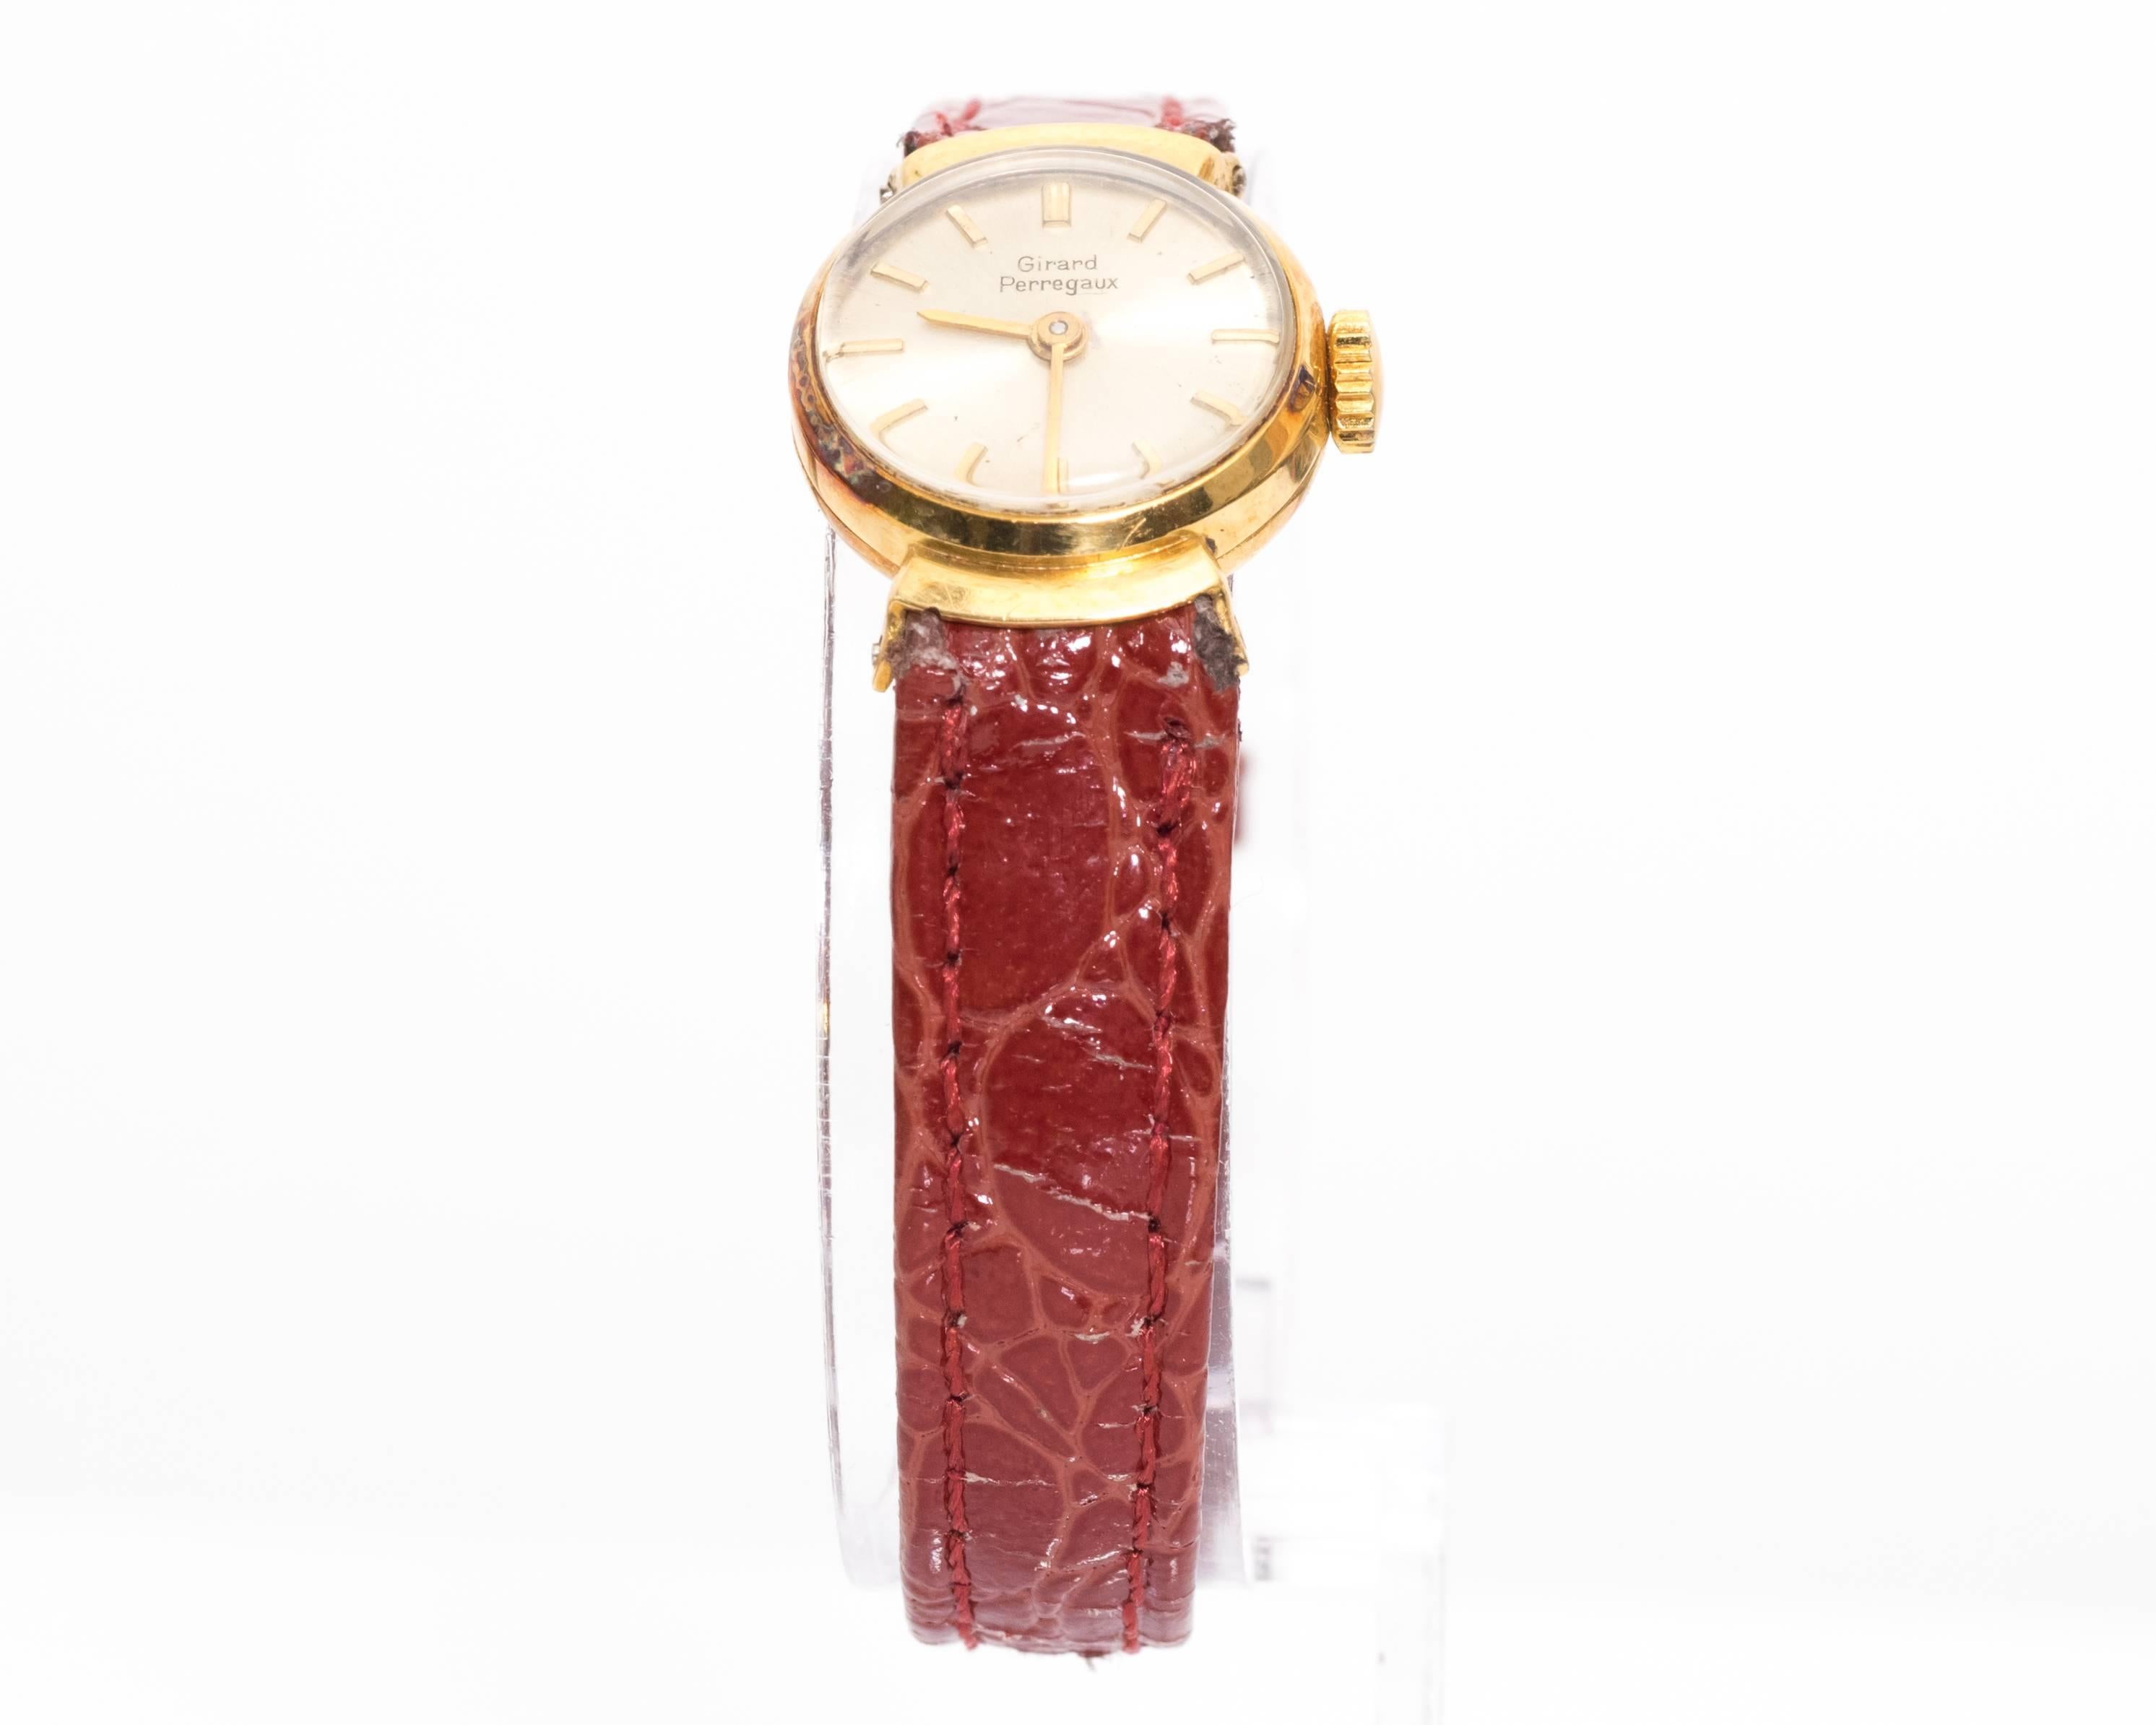 1950s Girard Perregaux Ladies Wristwatch
Yellow Gold
Made in Switzerland
Winding movement watch
Patina on Metal, common due to age of watch. Hints of rainbow color on case. 
Fits 7.5 inch wrist
Case Size is 16 millimeter

Band is an after market red